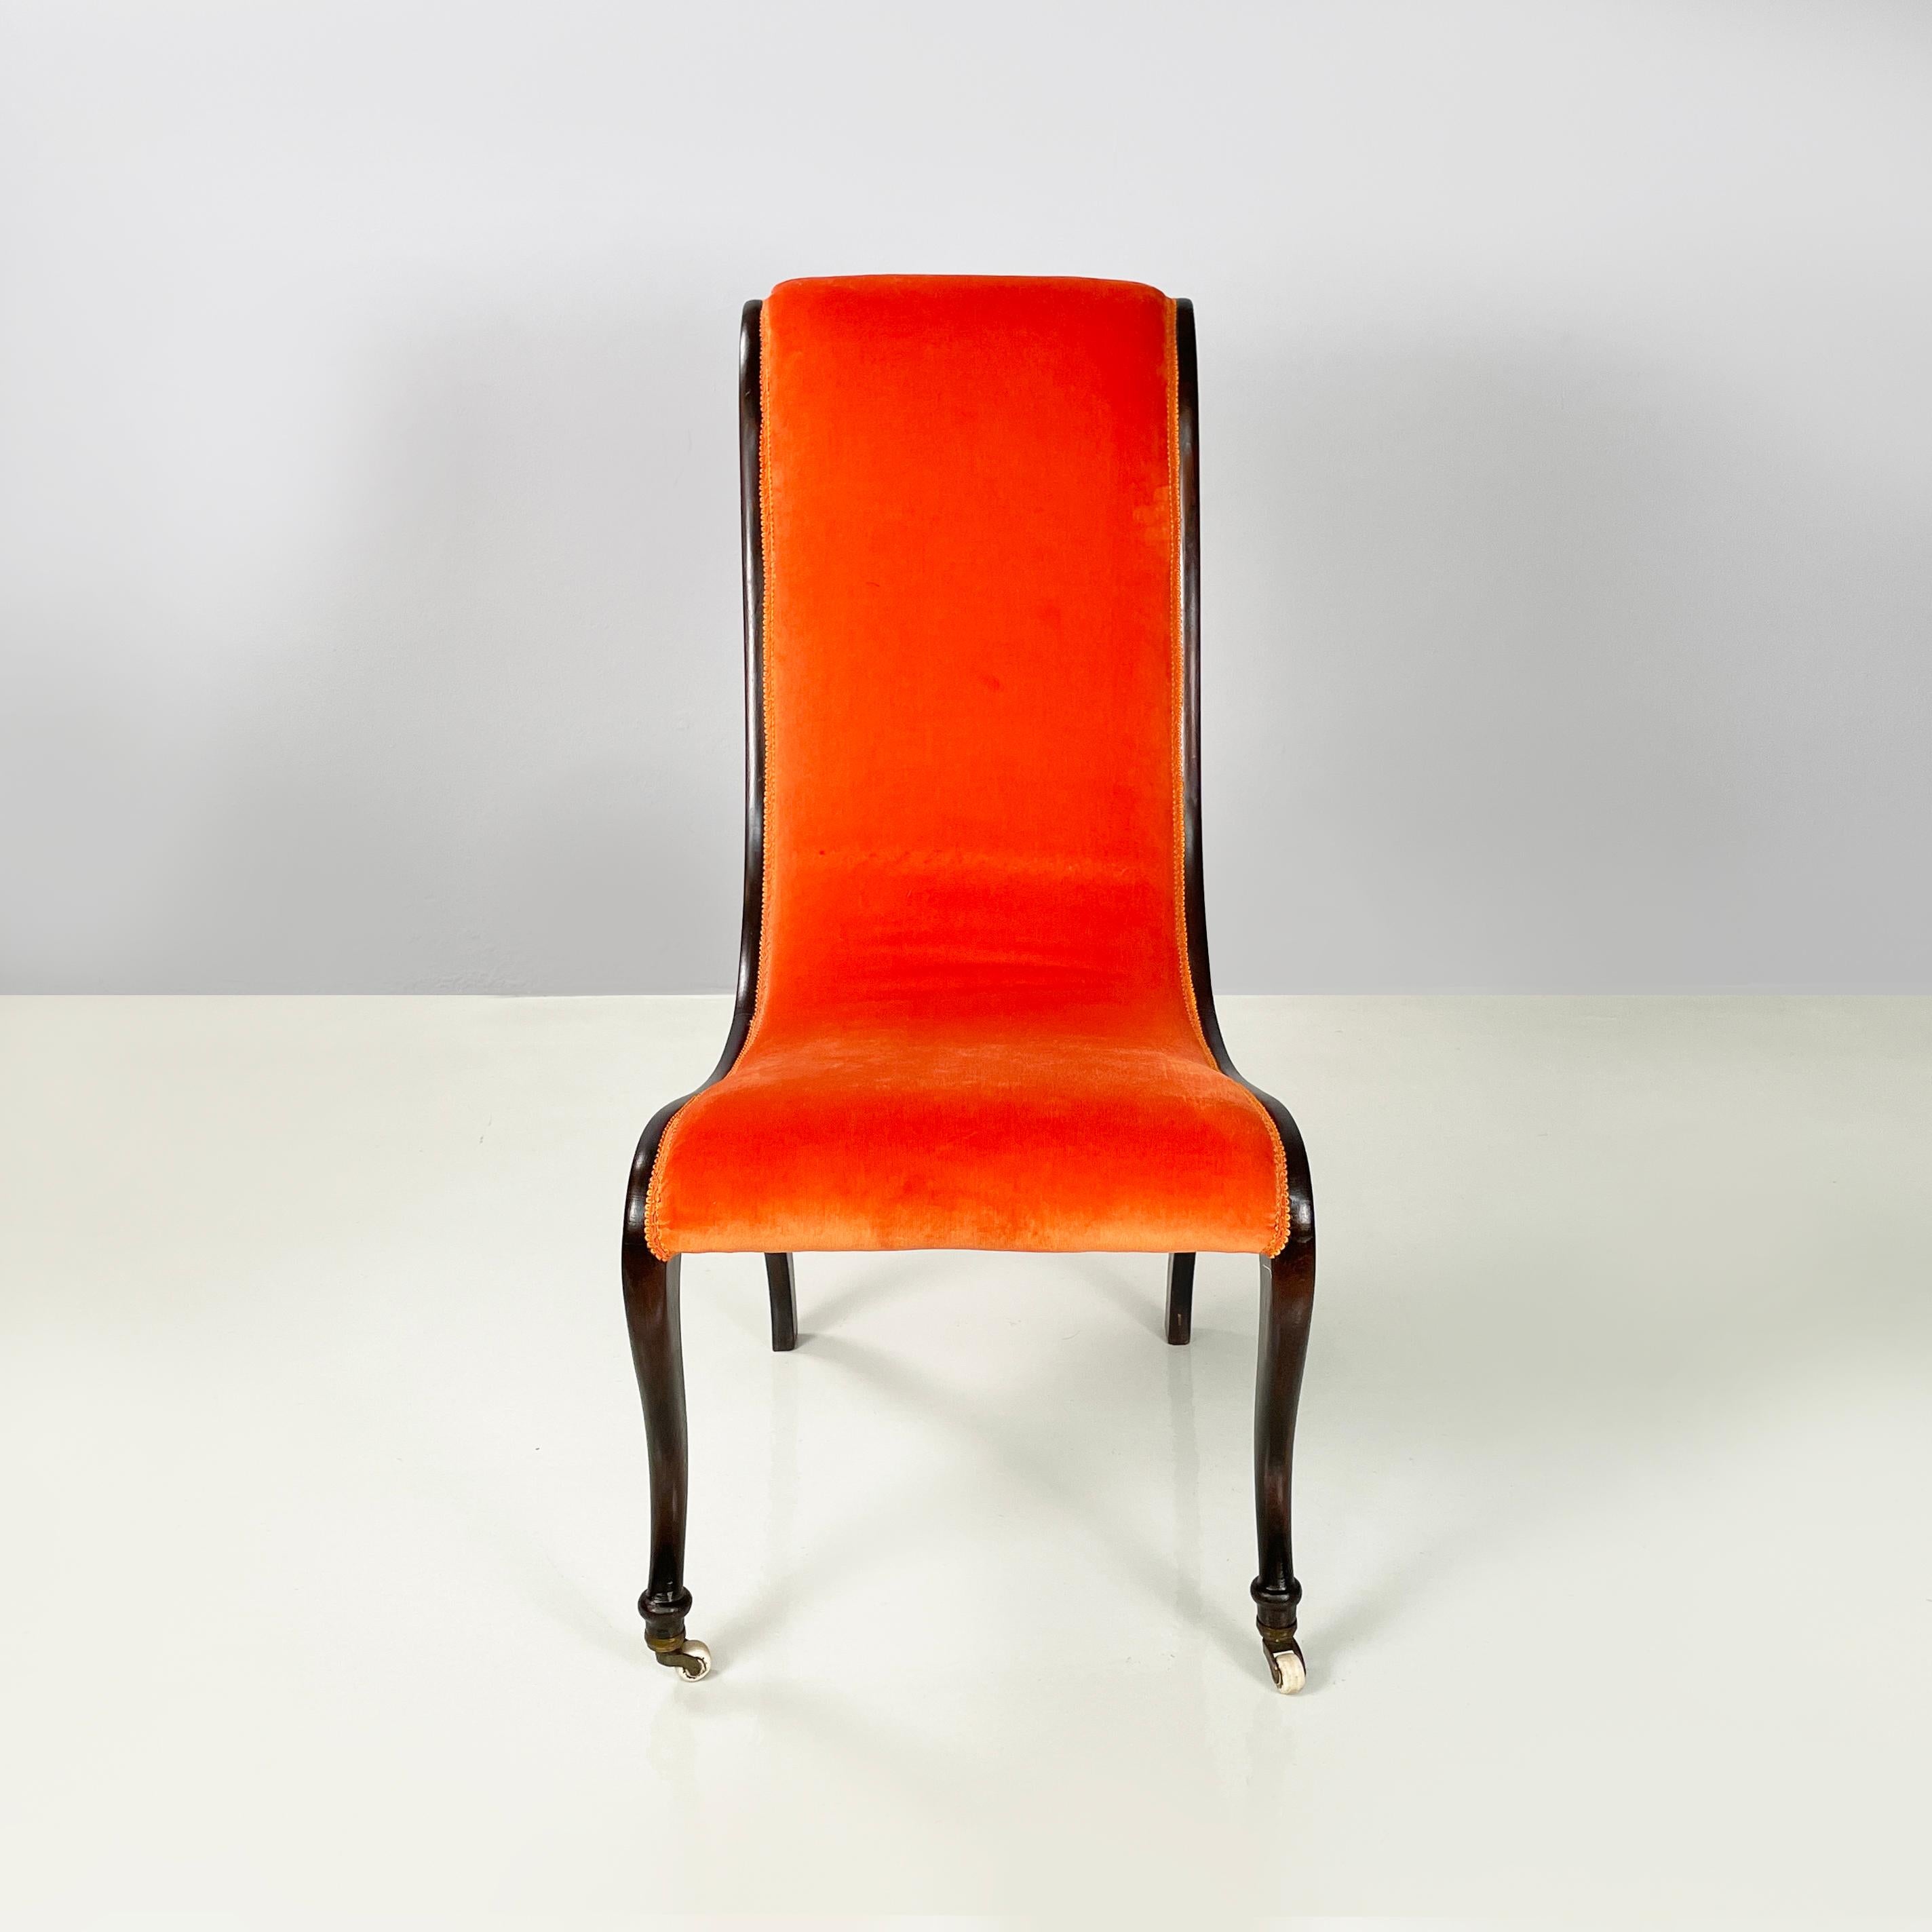 Danish mid-century modern Chair in orange velvet and dark wood, 1950s
Chair with curved back and seat, padded and covered in bright orange velvet fabric. The edges are finished with orange trimmings. The structure that follows the curve of the seat